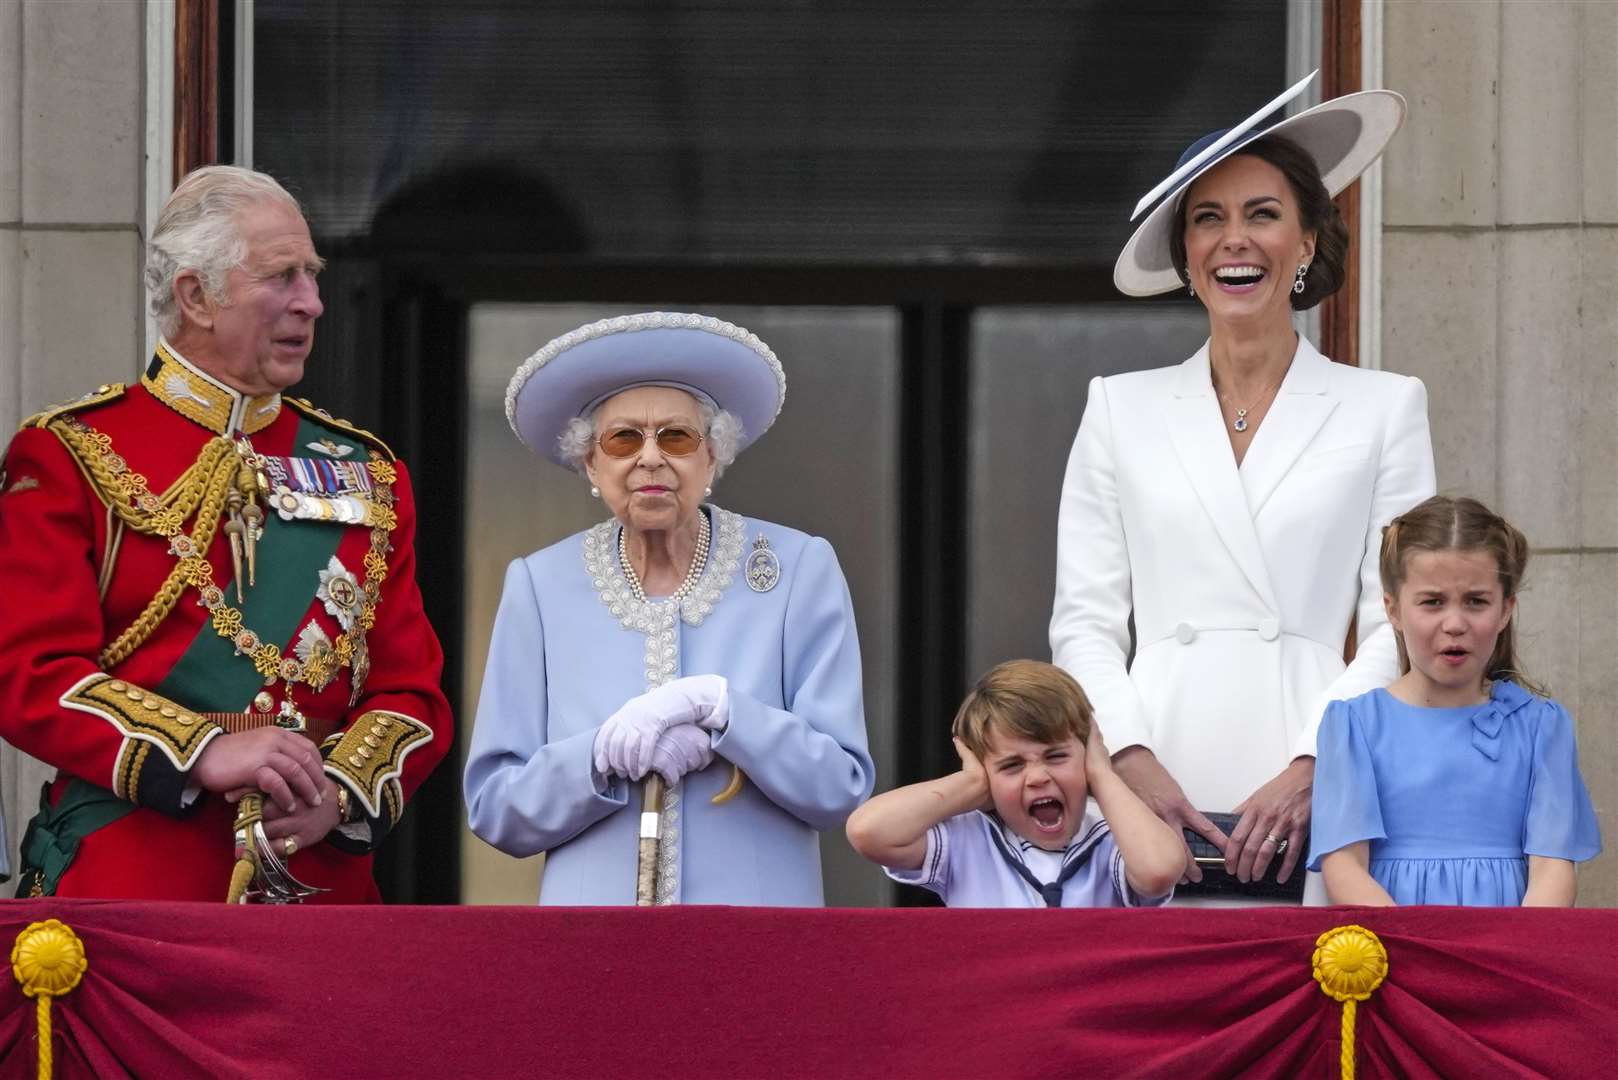 The Queen on the balcony on Thursday (Alastair Grant/PA)